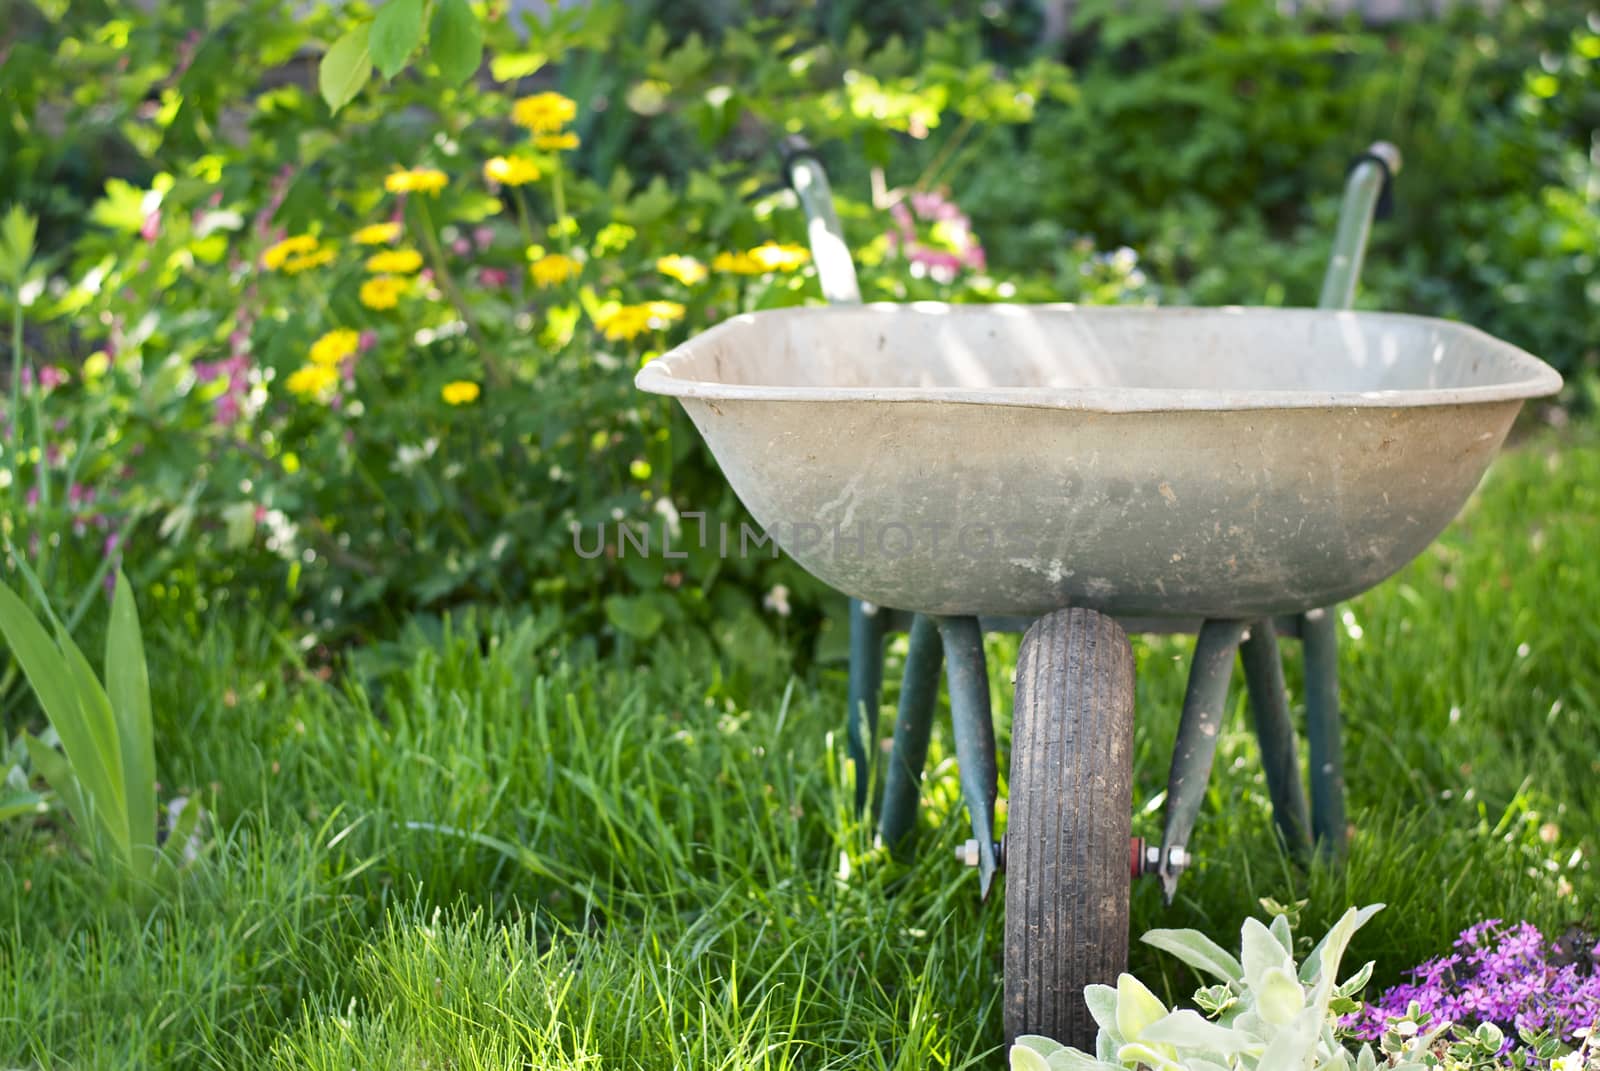 wheelbarrow to work in the garden on a background of green plants